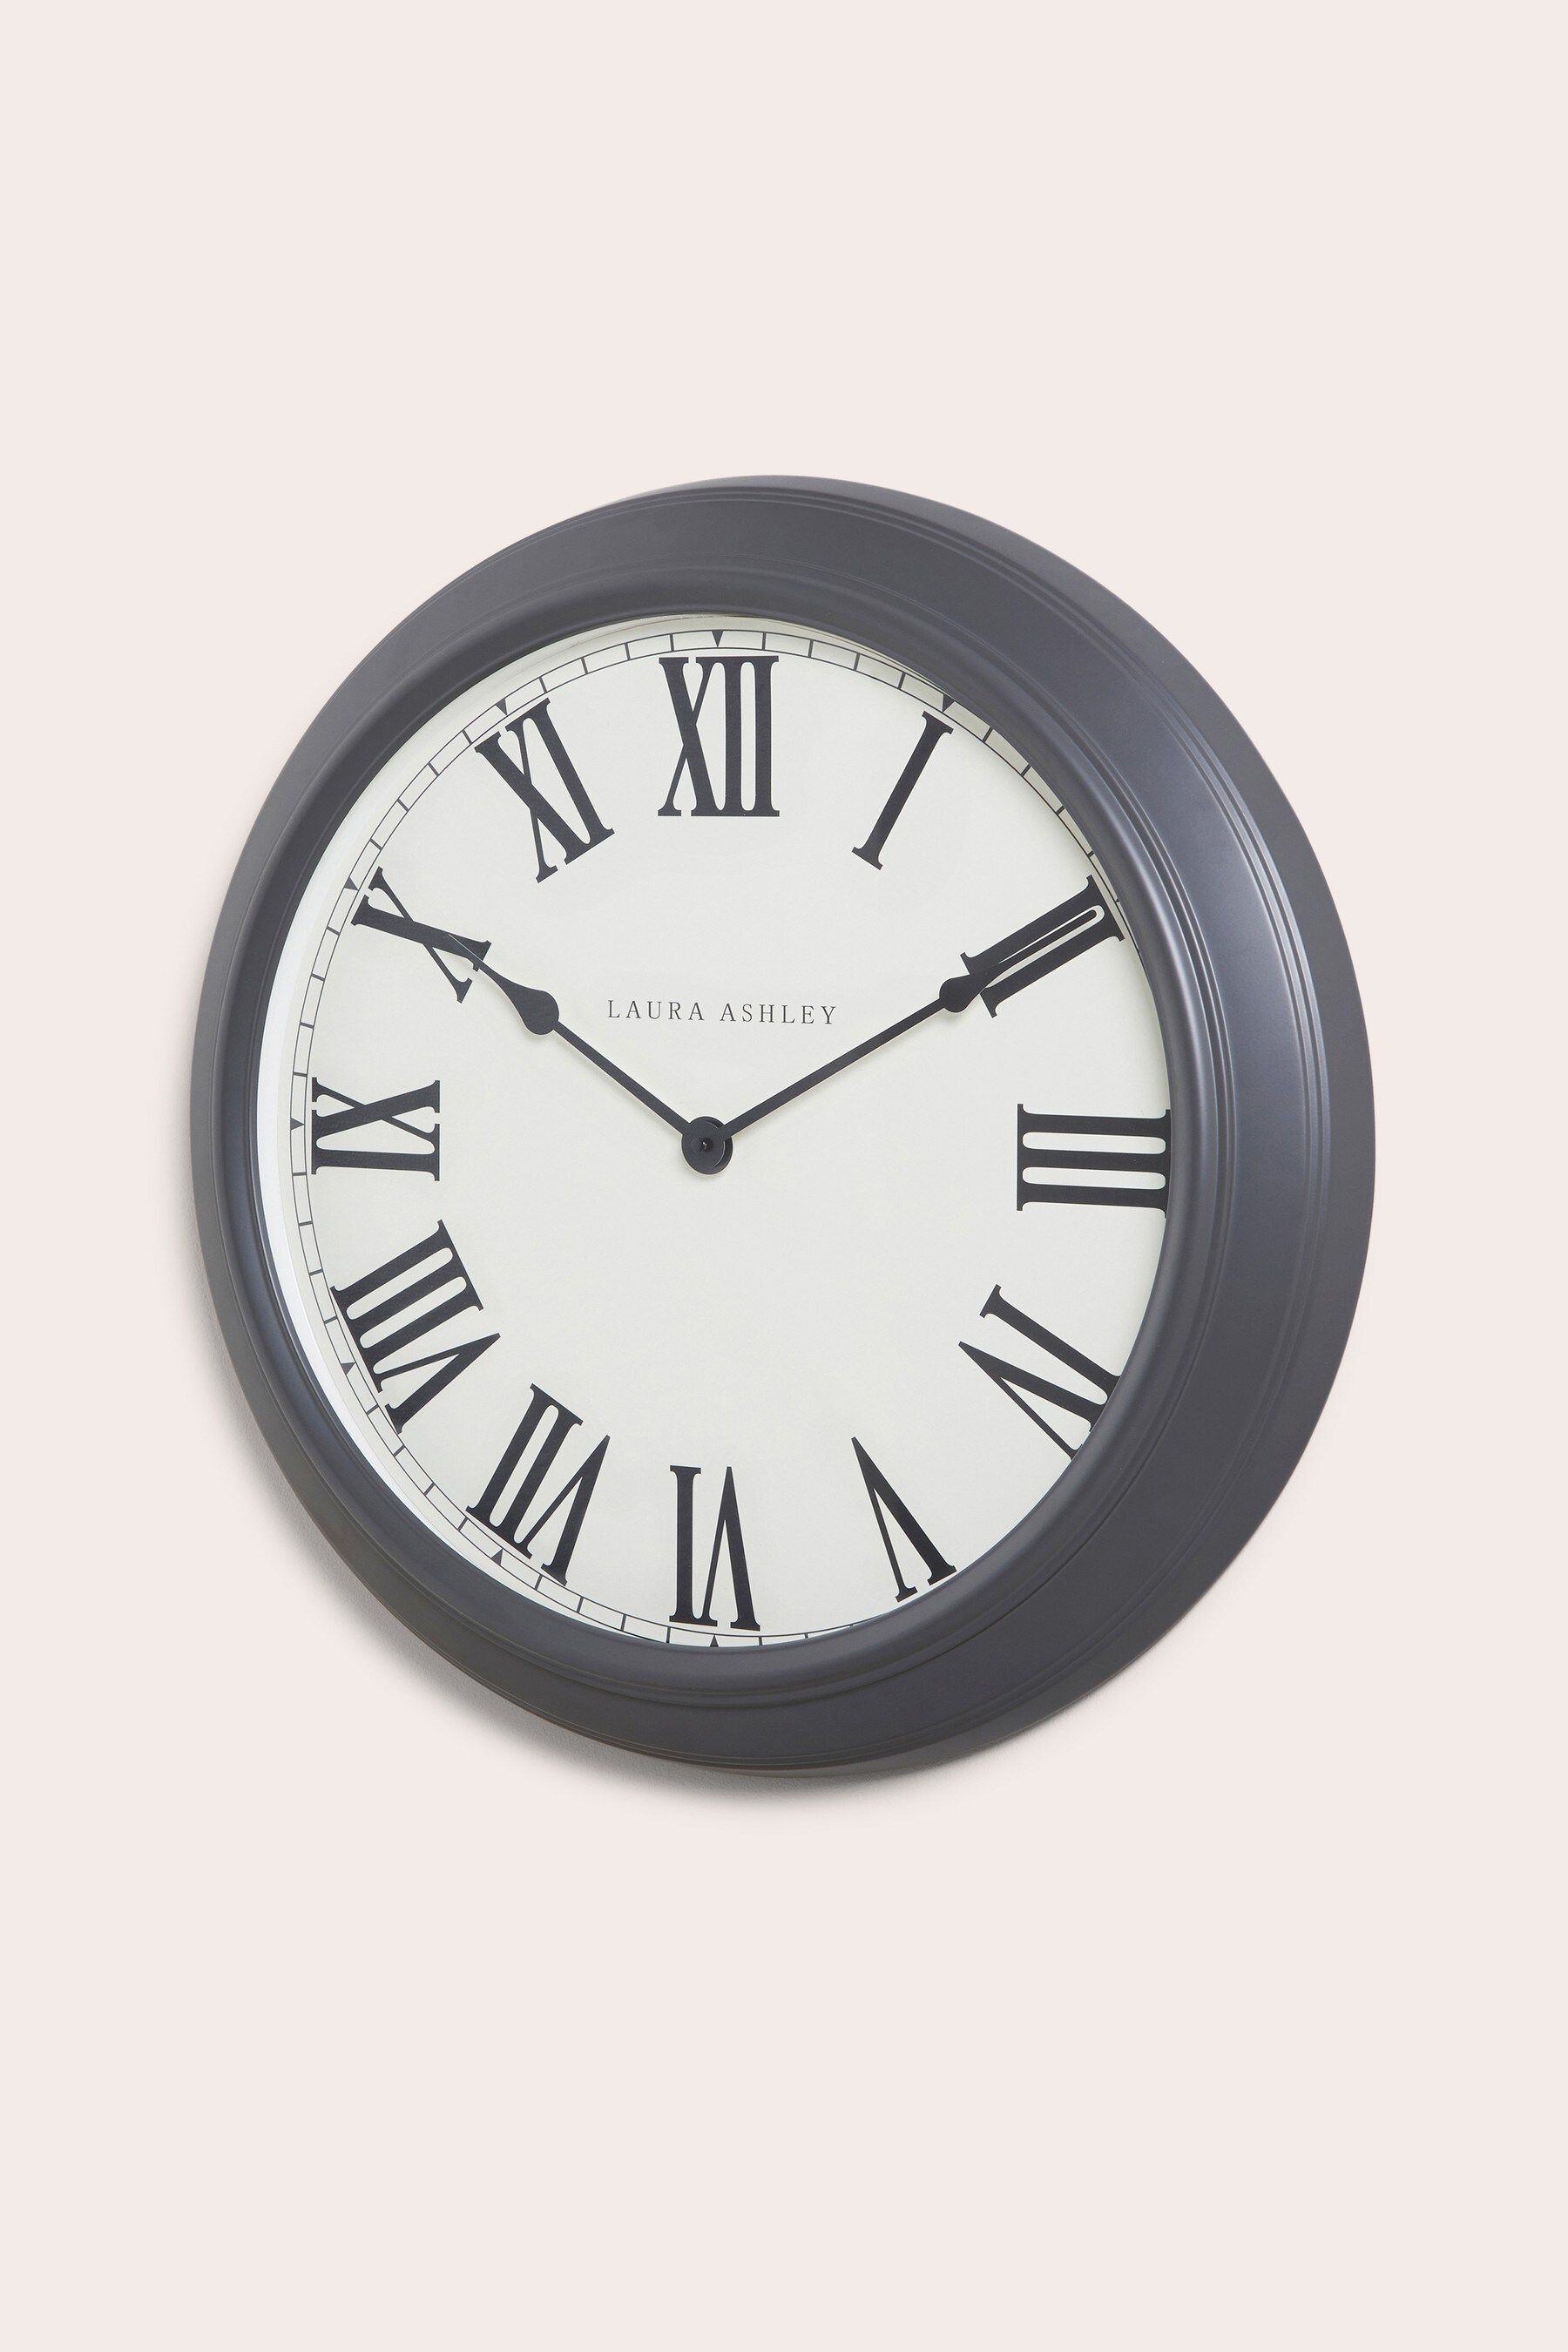 Buy Laura Ashley Oversized Gallery Wall Clock from the Next UK online shop